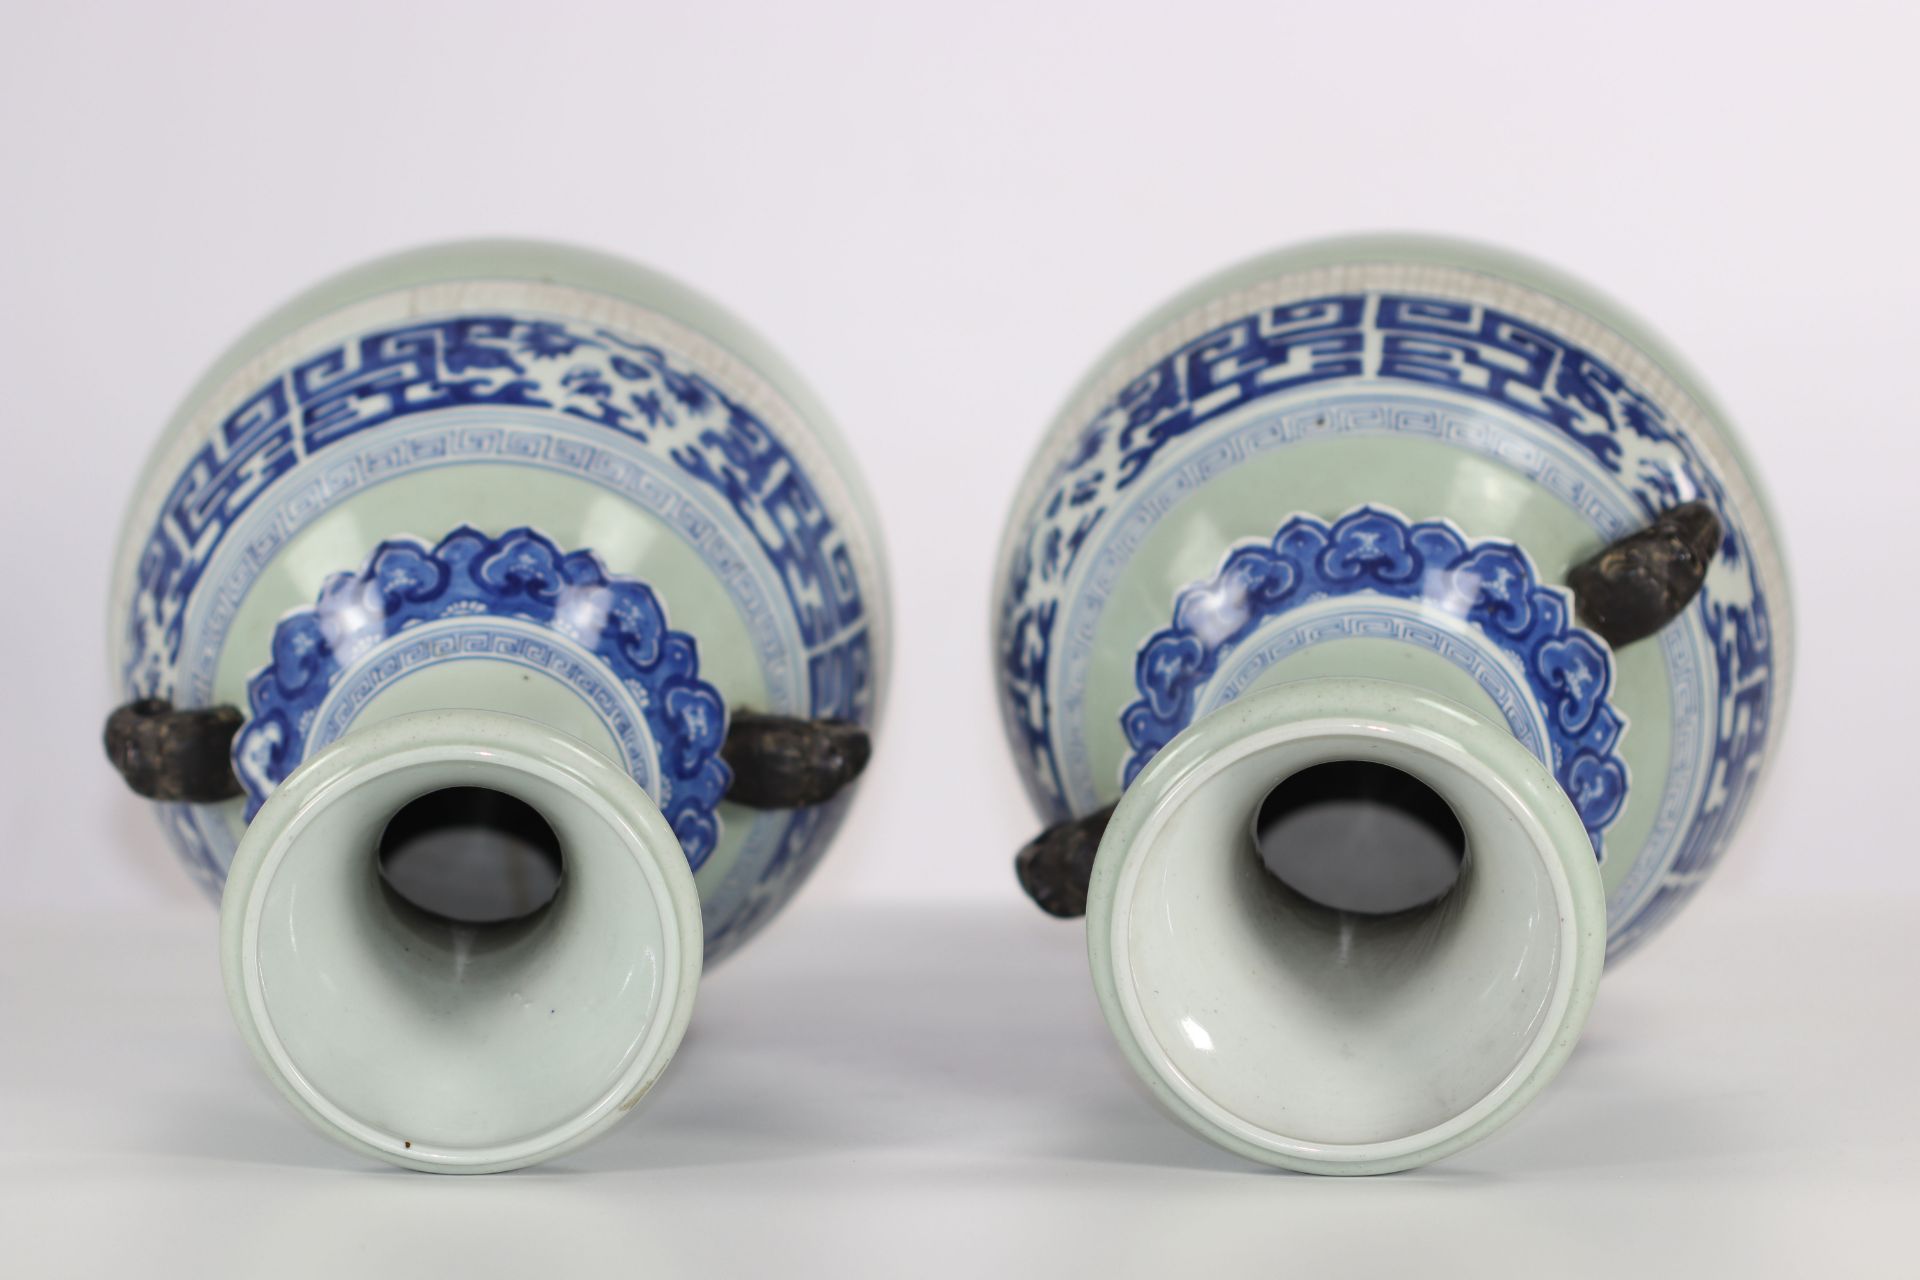 Pair of Nanjing porcelain vases, late 19th century China. - Image 6 of 6